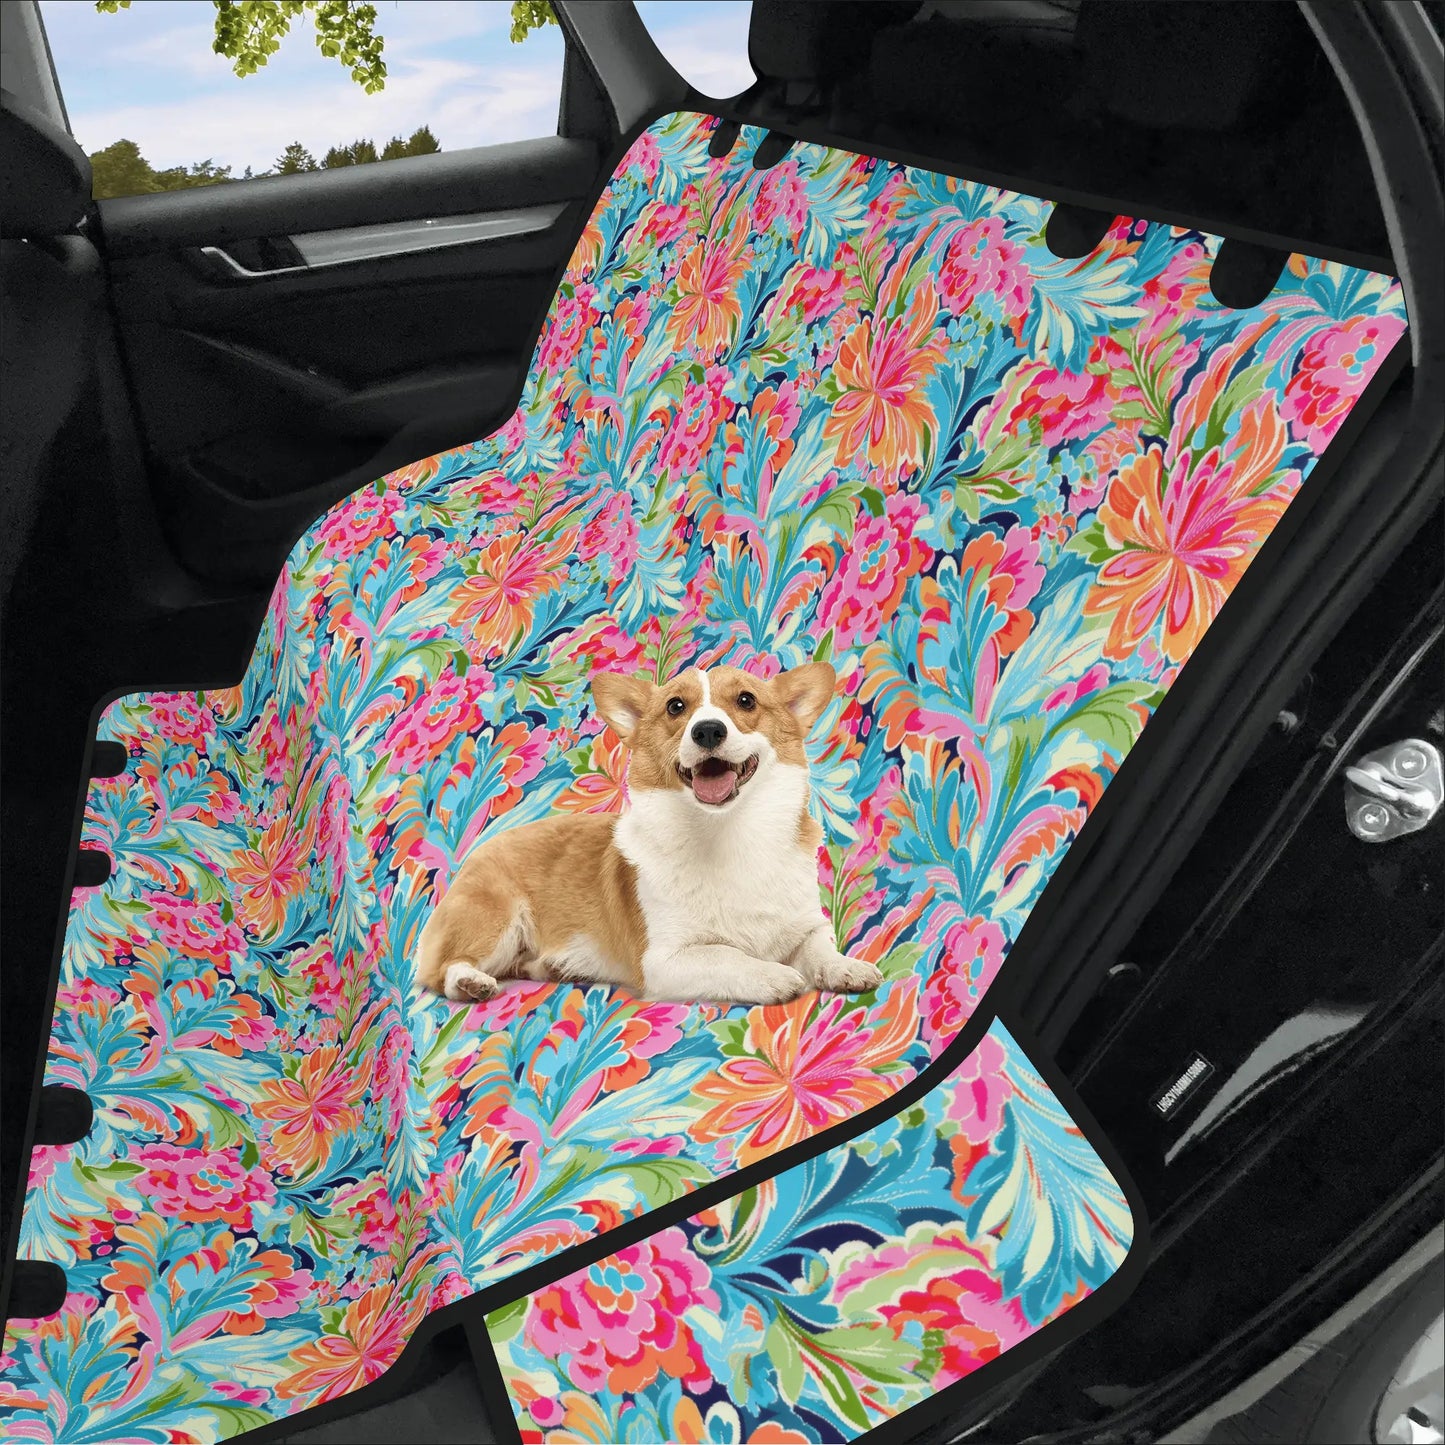 Tropical Radiance: Bursting Summer Blooms in Teal, Orange, and Pink Car Pet Seat Cover 2 Sizes